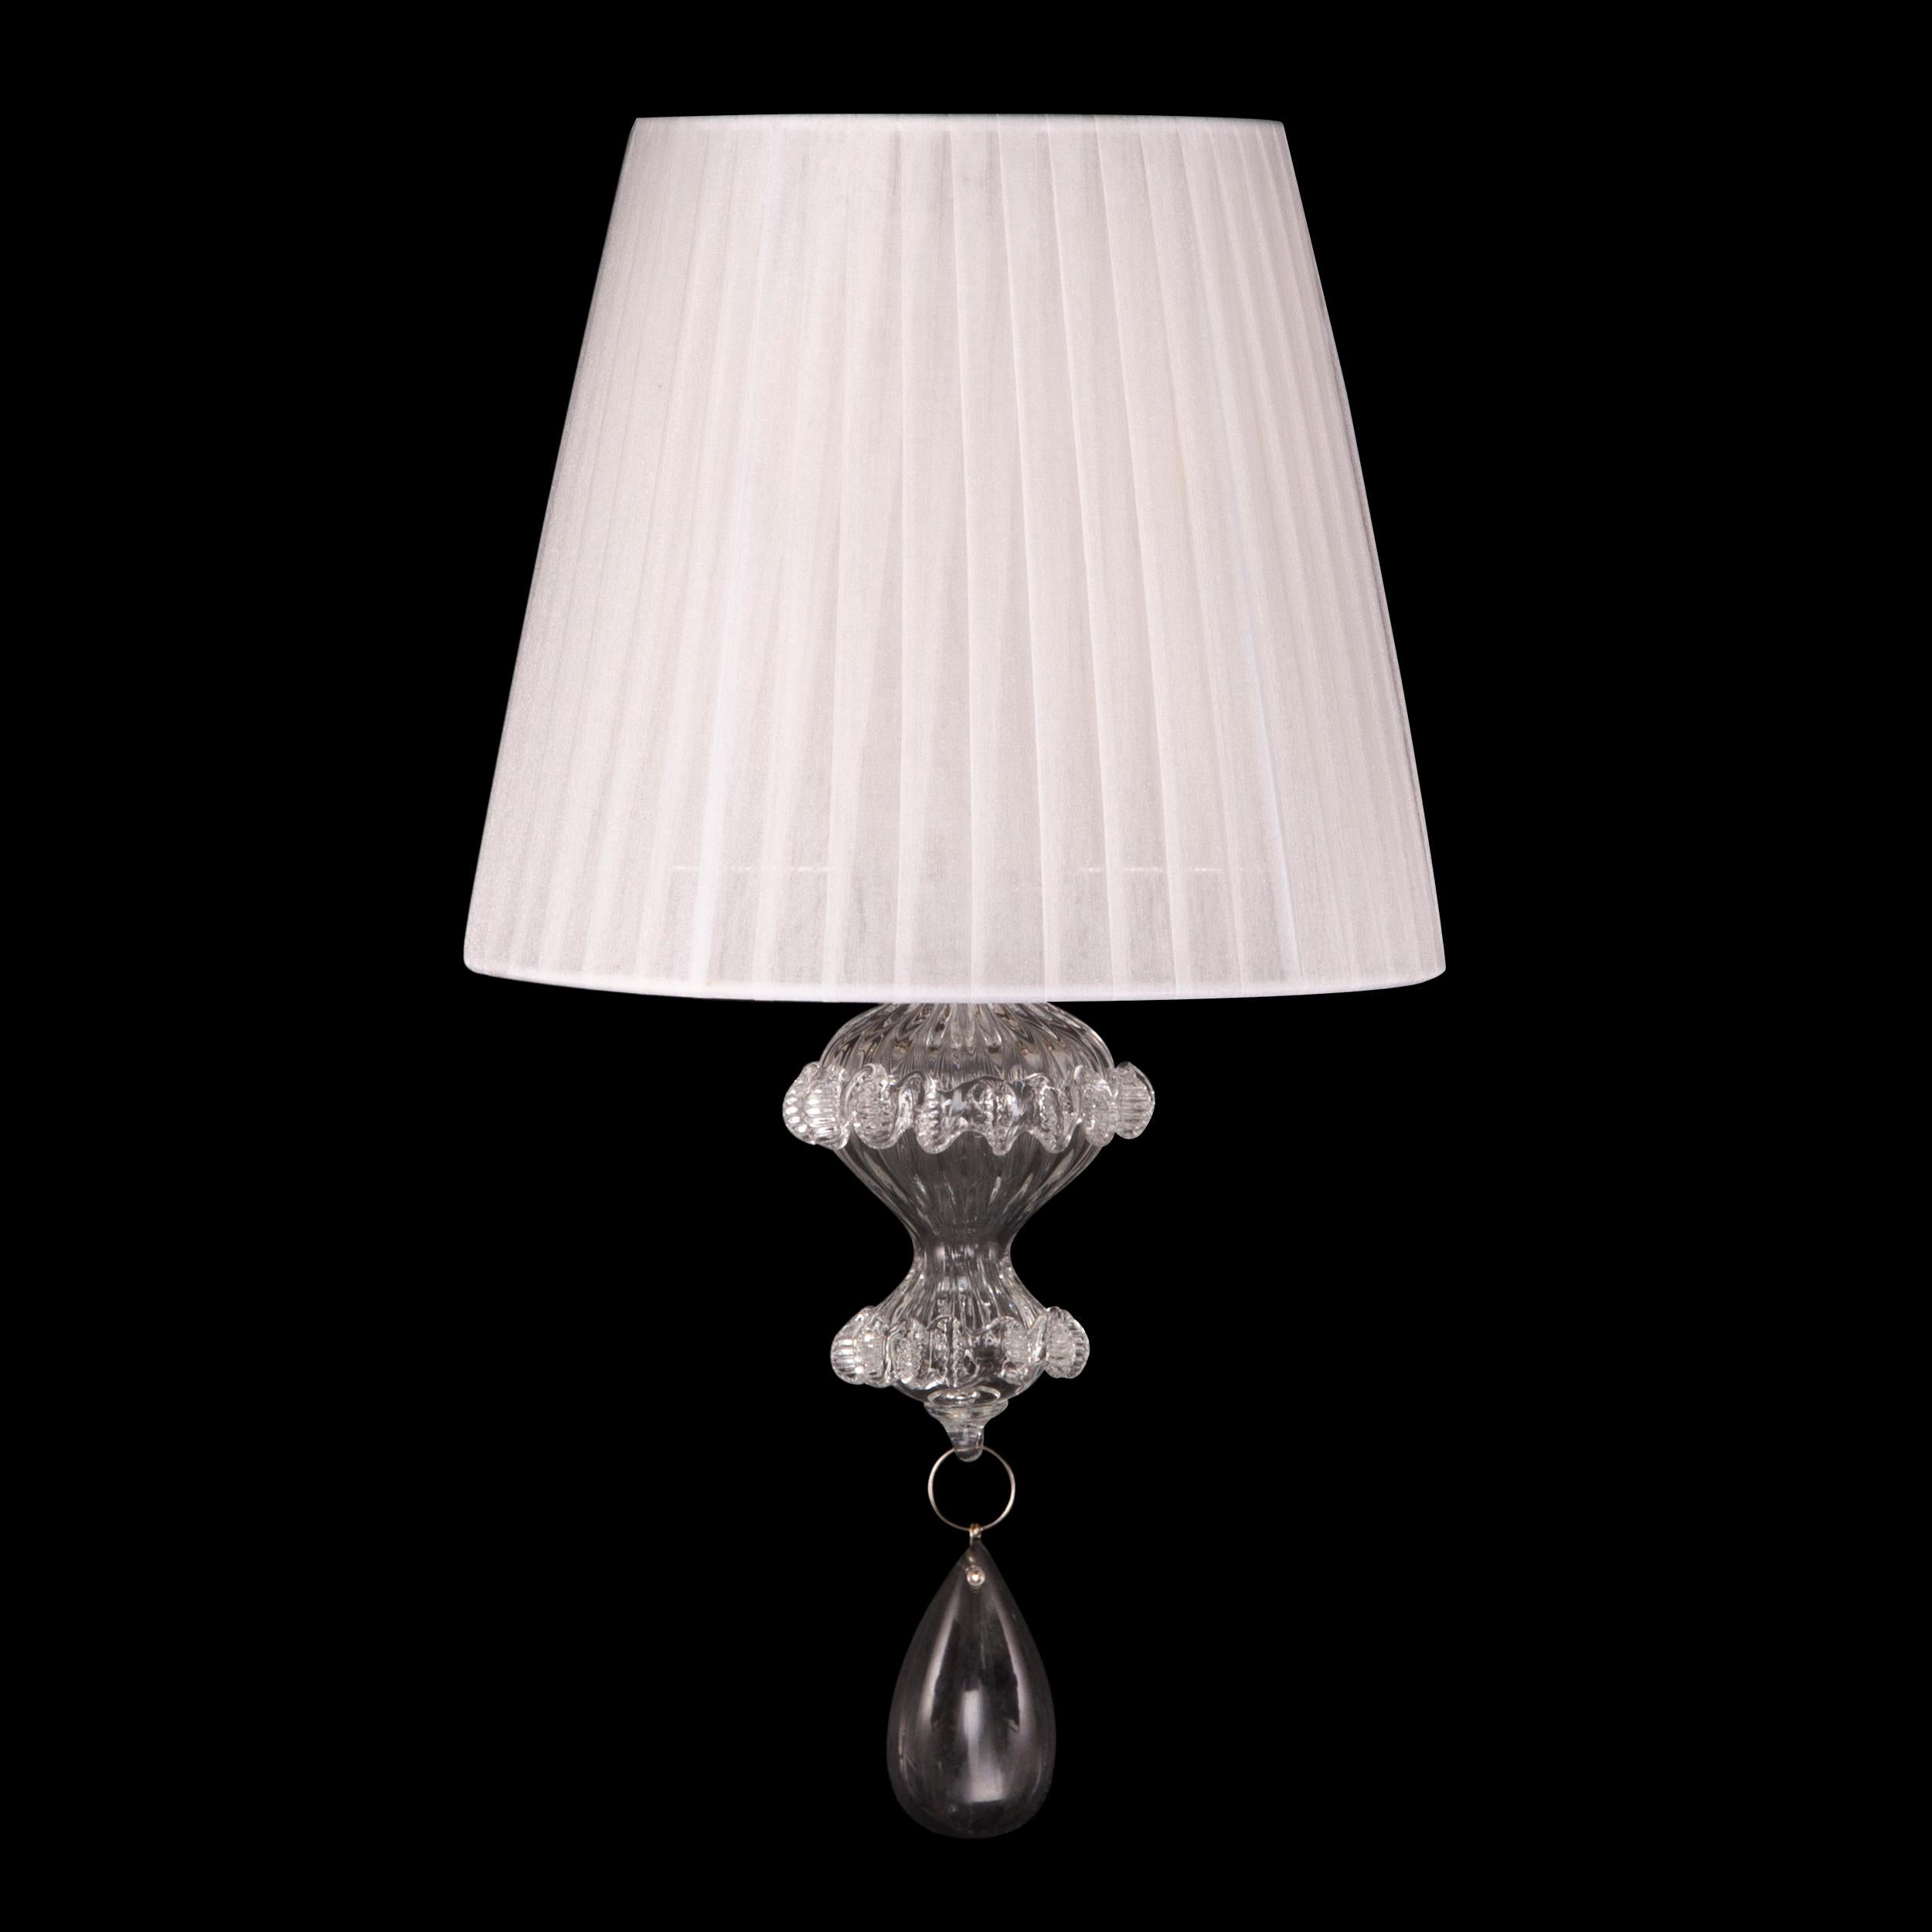 Elegant sconce 1 arm in transparent Murano glass with white plissé lampshade Montecristo by Multiforme

A collection that ideally recalls the splendour of the past, the sumptuous ballrooms of ancient Venice. A combination of craftsmanship skilfully